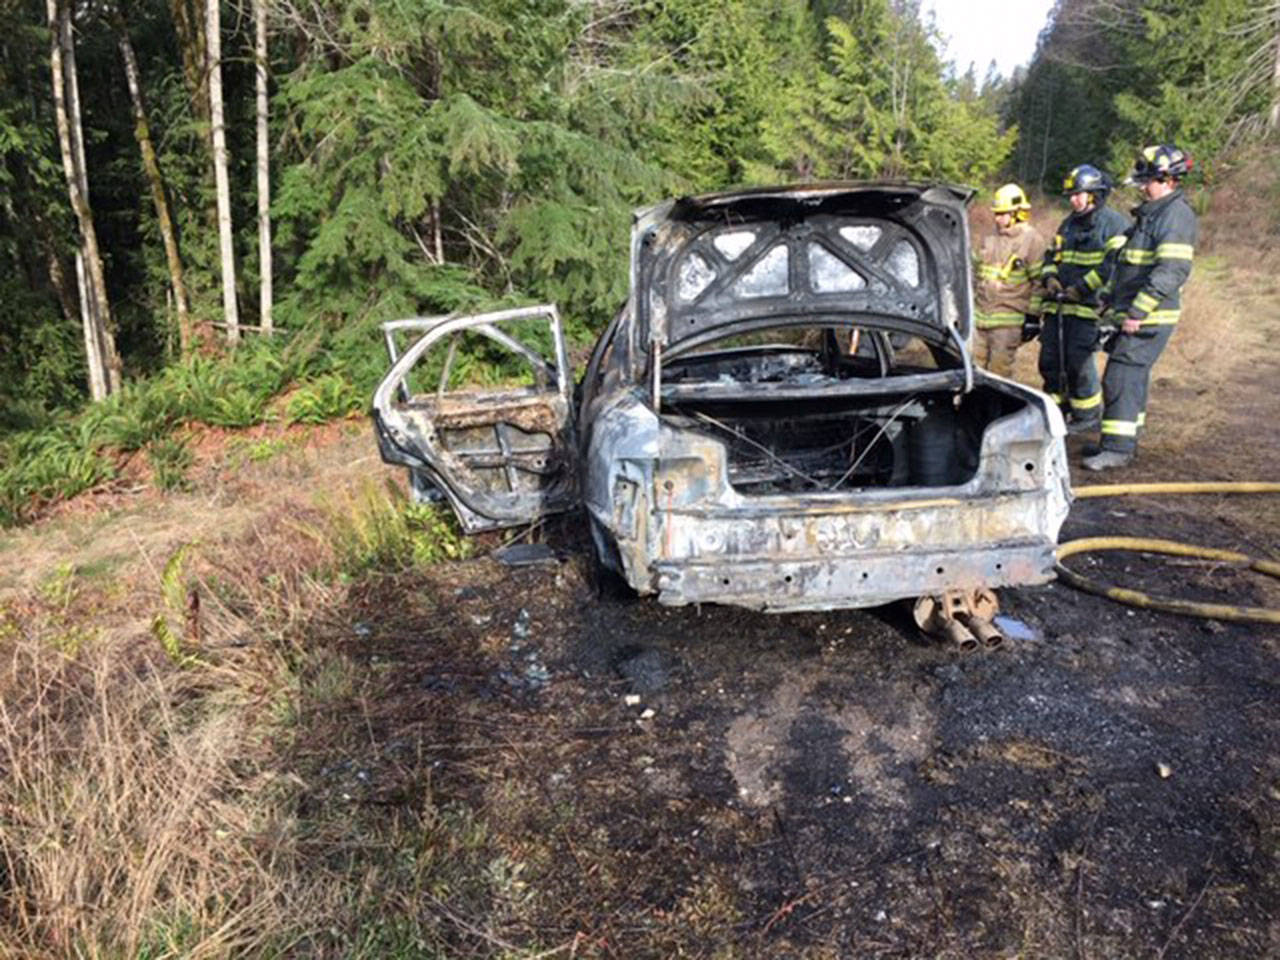 Firefighters from Clallam County Fire District 2 look over a vehicle that was fully engulfed in flames off U.S. Highway 101 near Milepost 241 on Monday. (Clallam County Fire District 2)